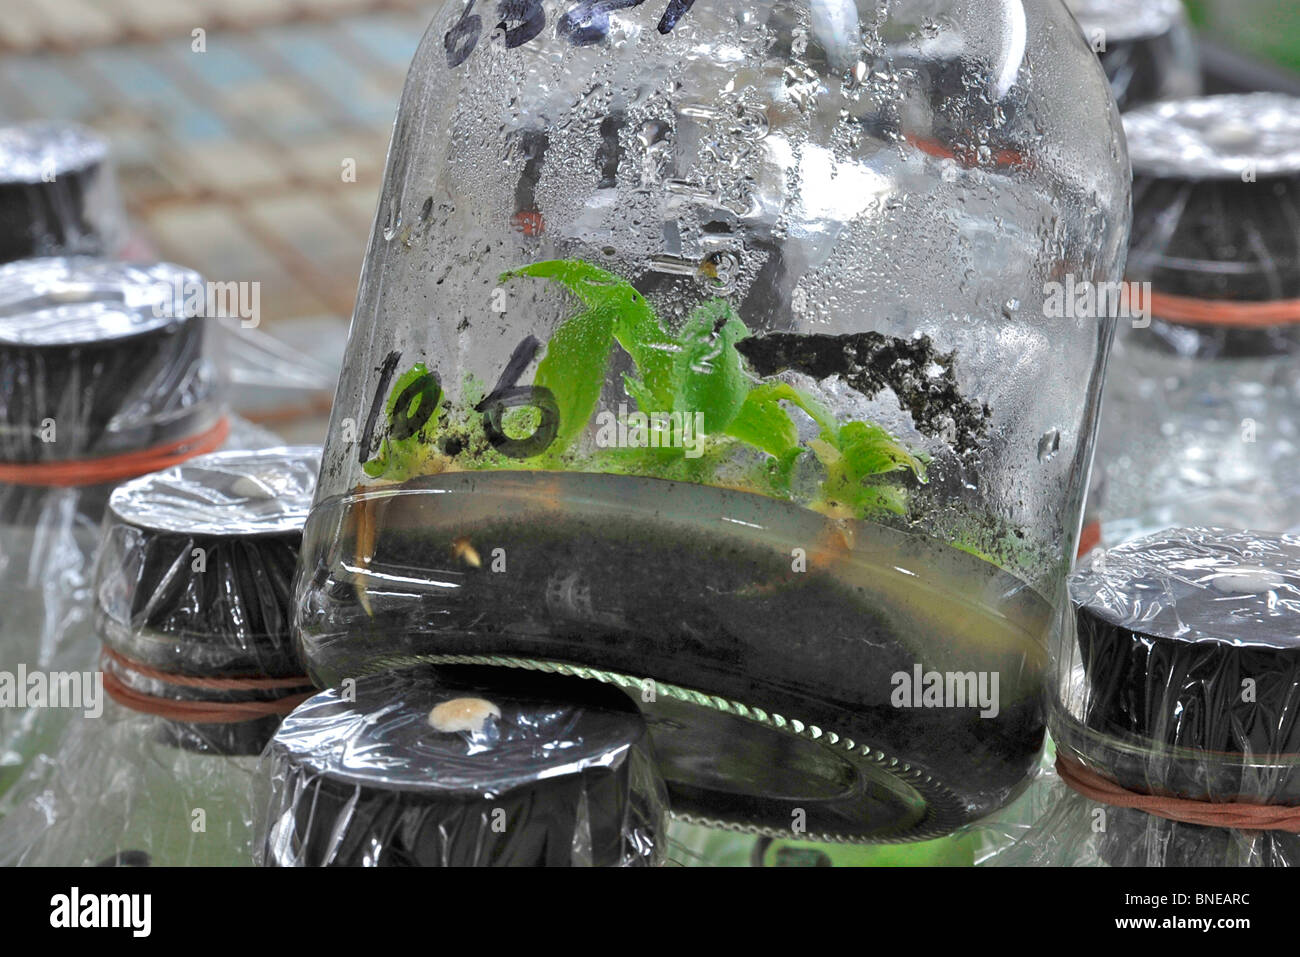 Specimen jars containing plants, R. O. C. Tissue Culture Labs, Ching Hua Orchids, Xinying City, Tainan County, Taiwan Stock Photo